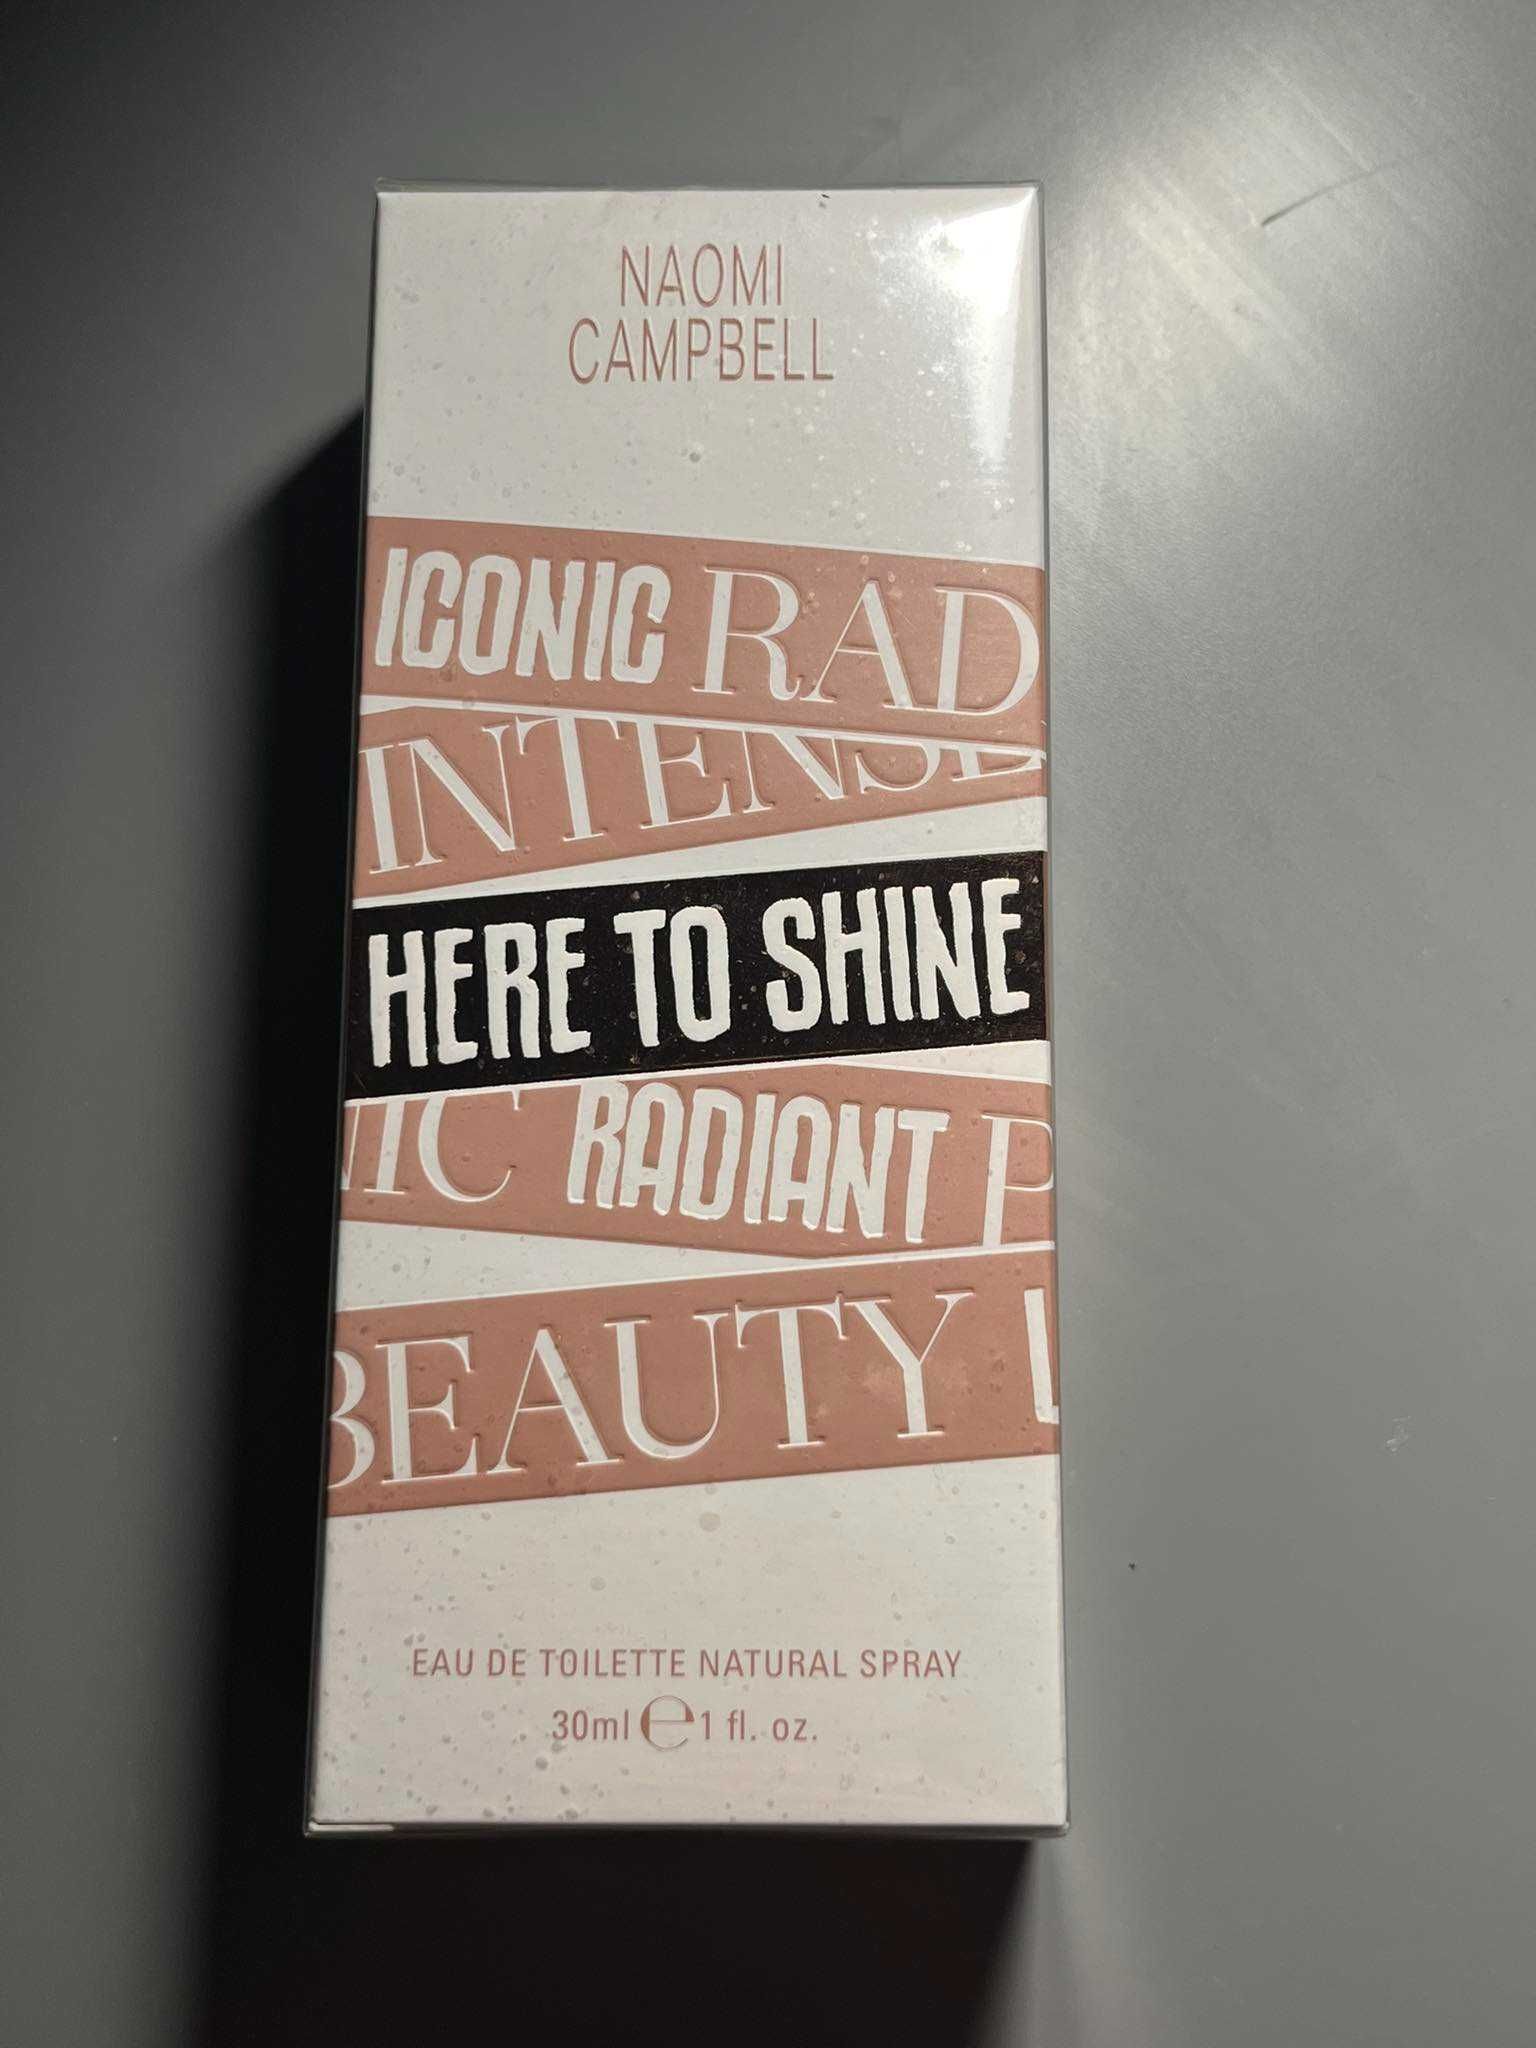 Naomi Campbell Here To Shine Iconic Radiant 30 ml